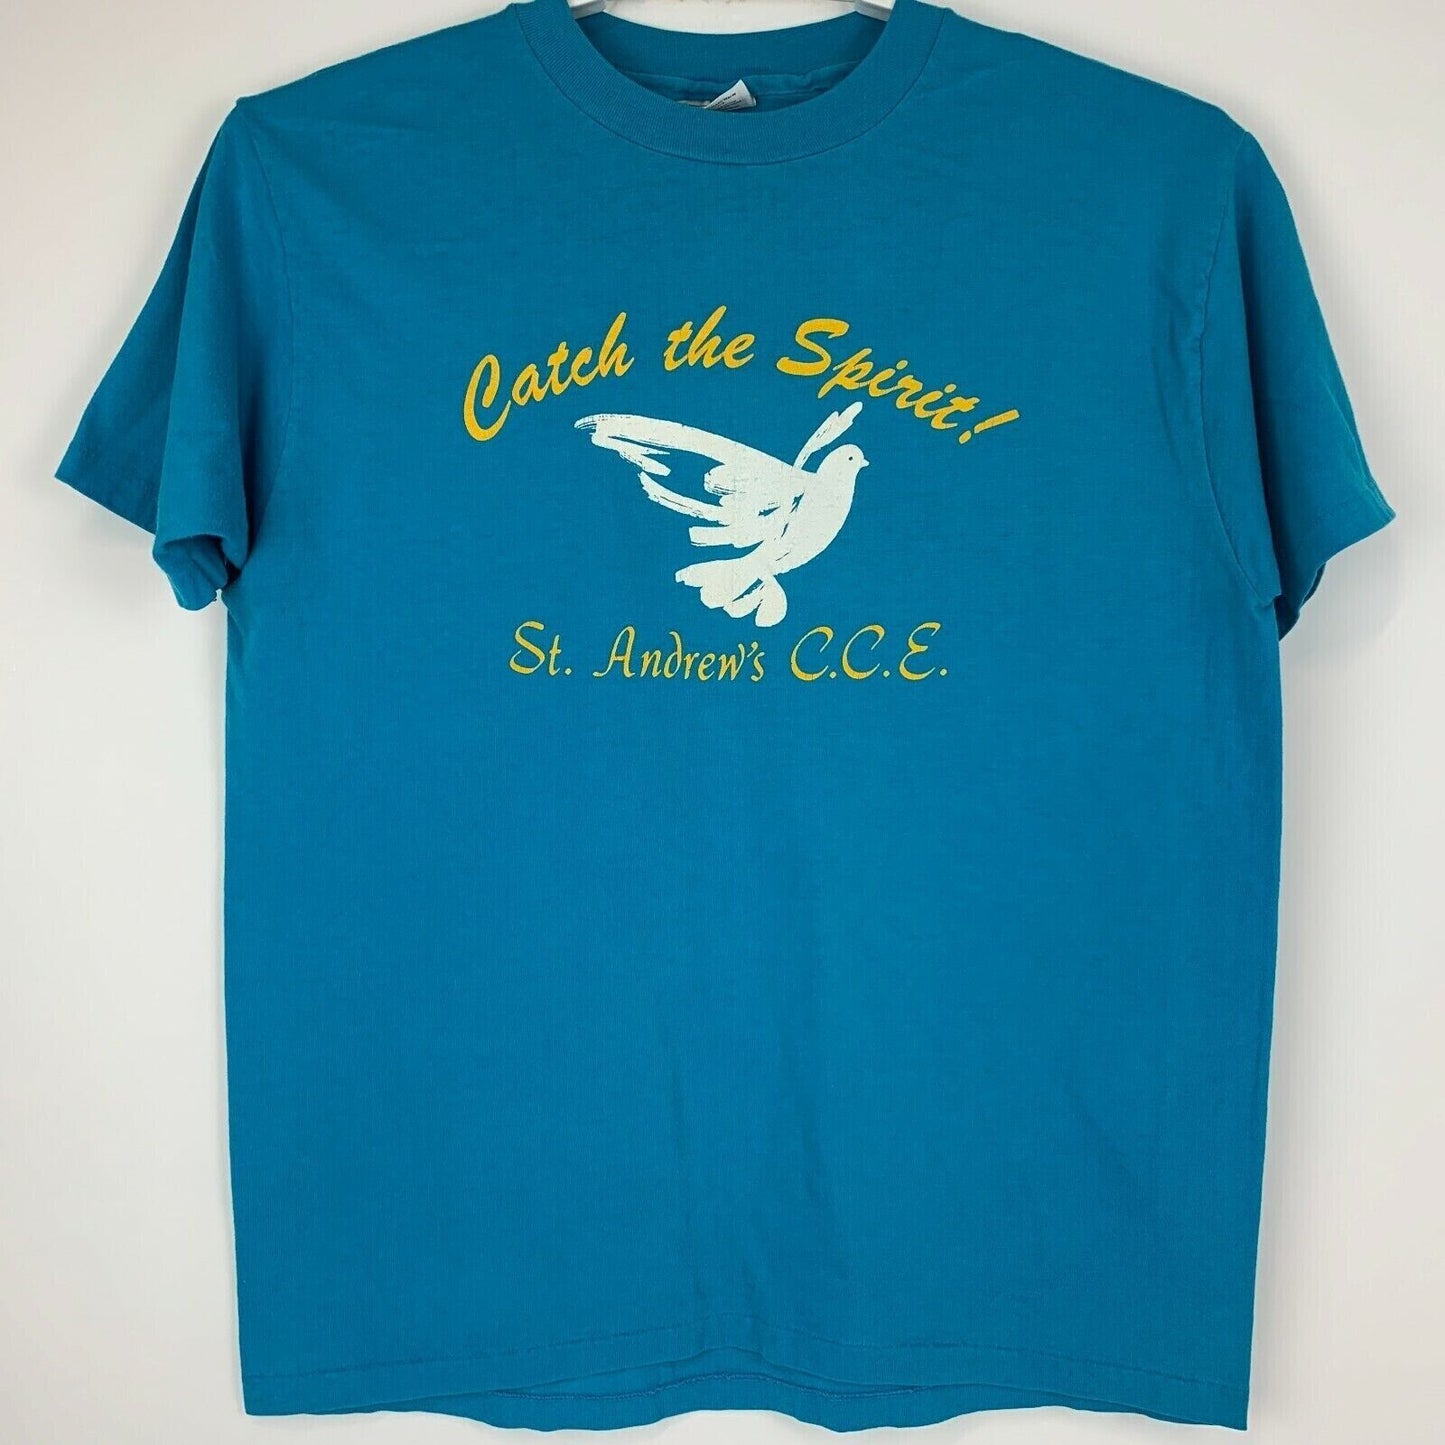 St Andrews Church CCE Vintage 80s T Shirt Catholic Lutheran Religion Dove Large